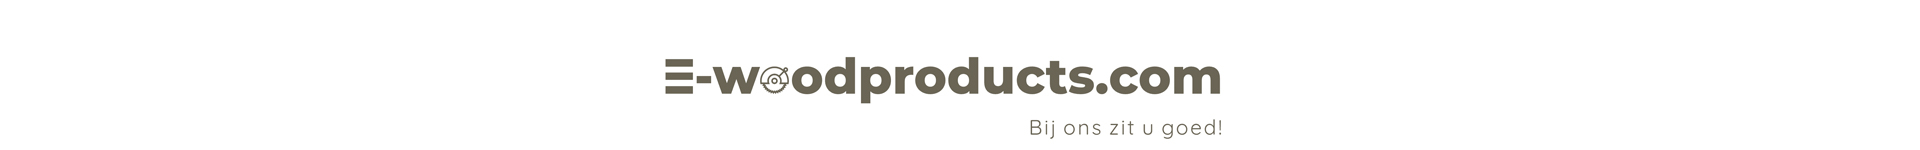 E-woodproducts.bes achtergrond